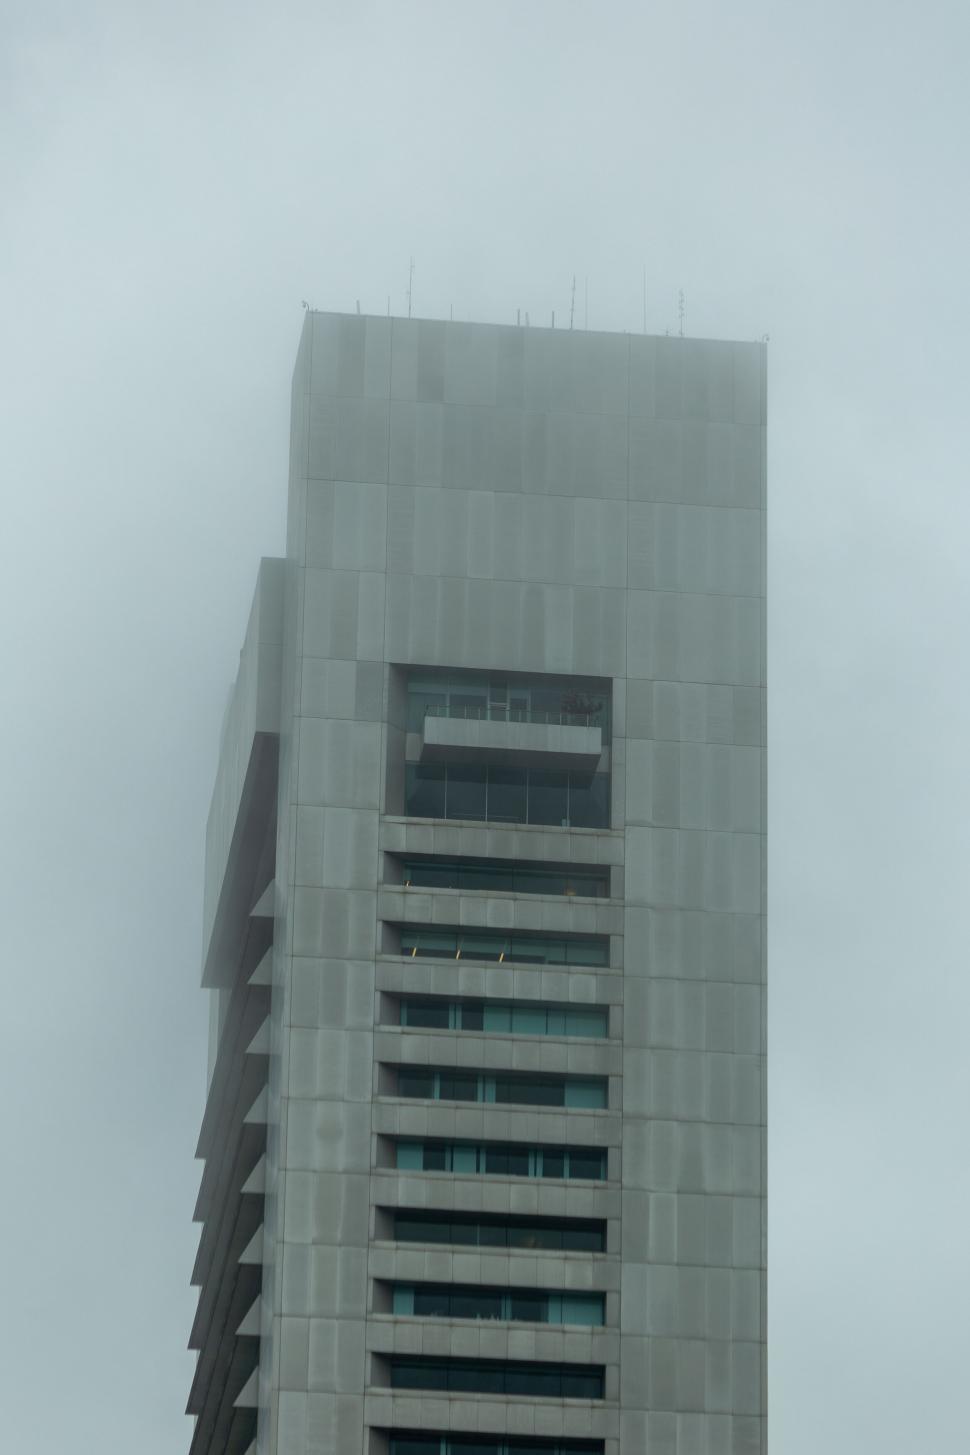 Free Image of Overcast sky over a gray building 